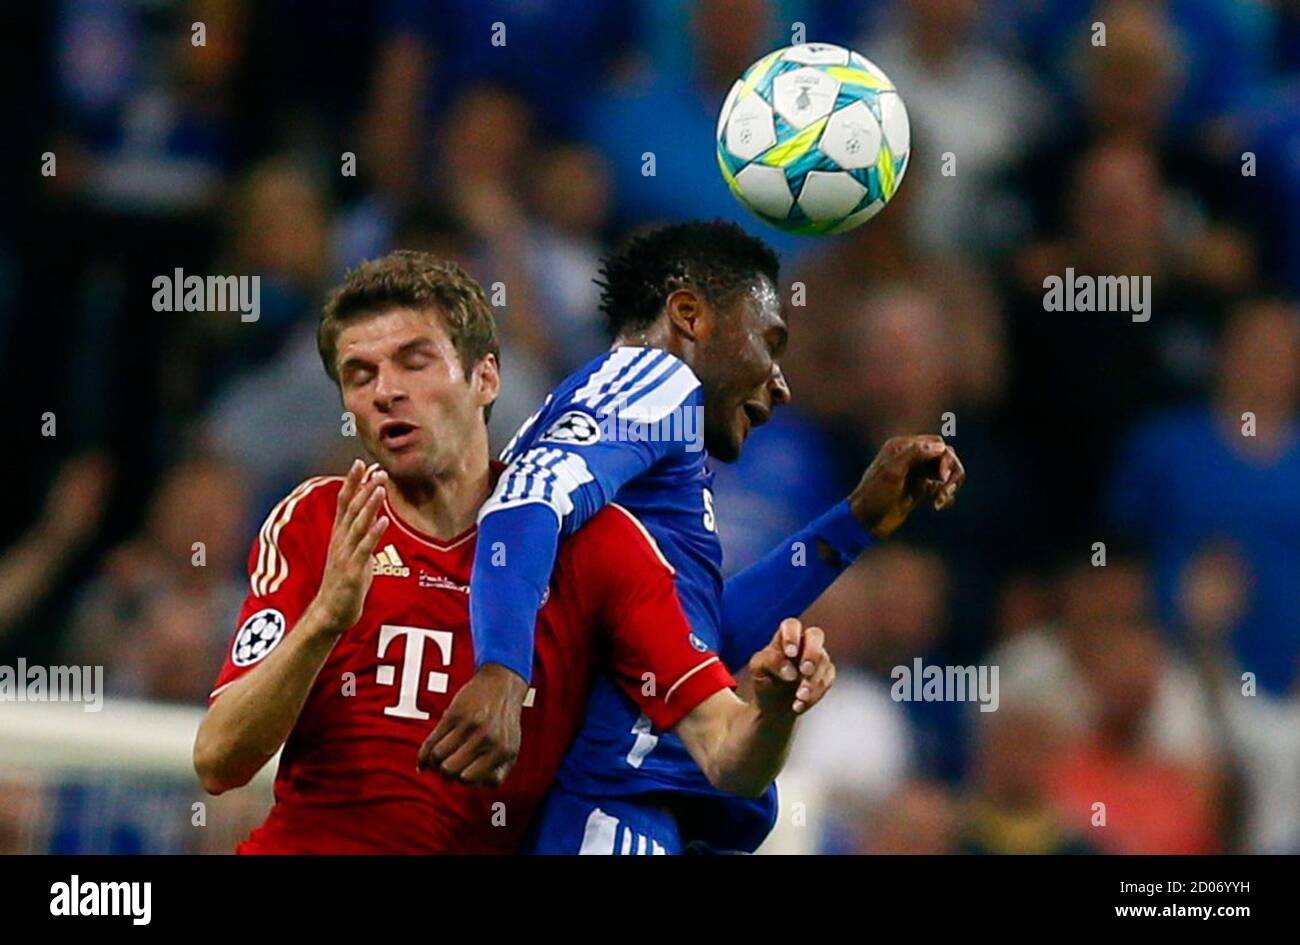 Thomas Mueller (L) of Bayern Munich fights for the ball with Salomon Kalou  of Chelsea during their Champions League final soccer match at the Allianz  Arena in Munich, May 19, 2012. REUTERS/Kai